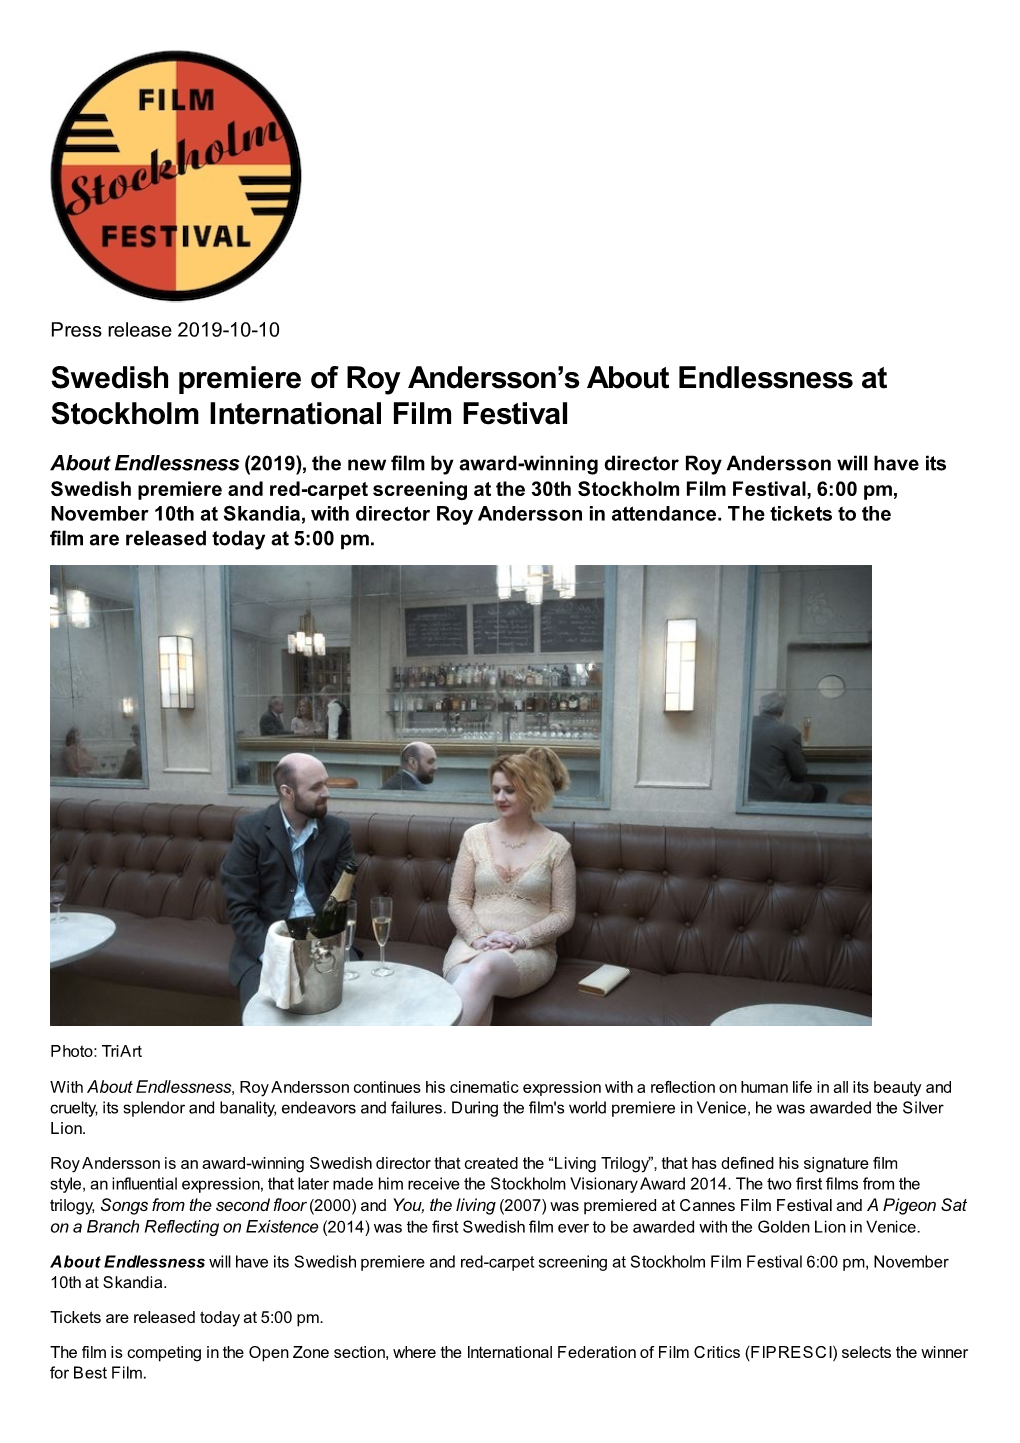 Swedish Premiere of Roy Andersson's About Endlessness at Stockholm